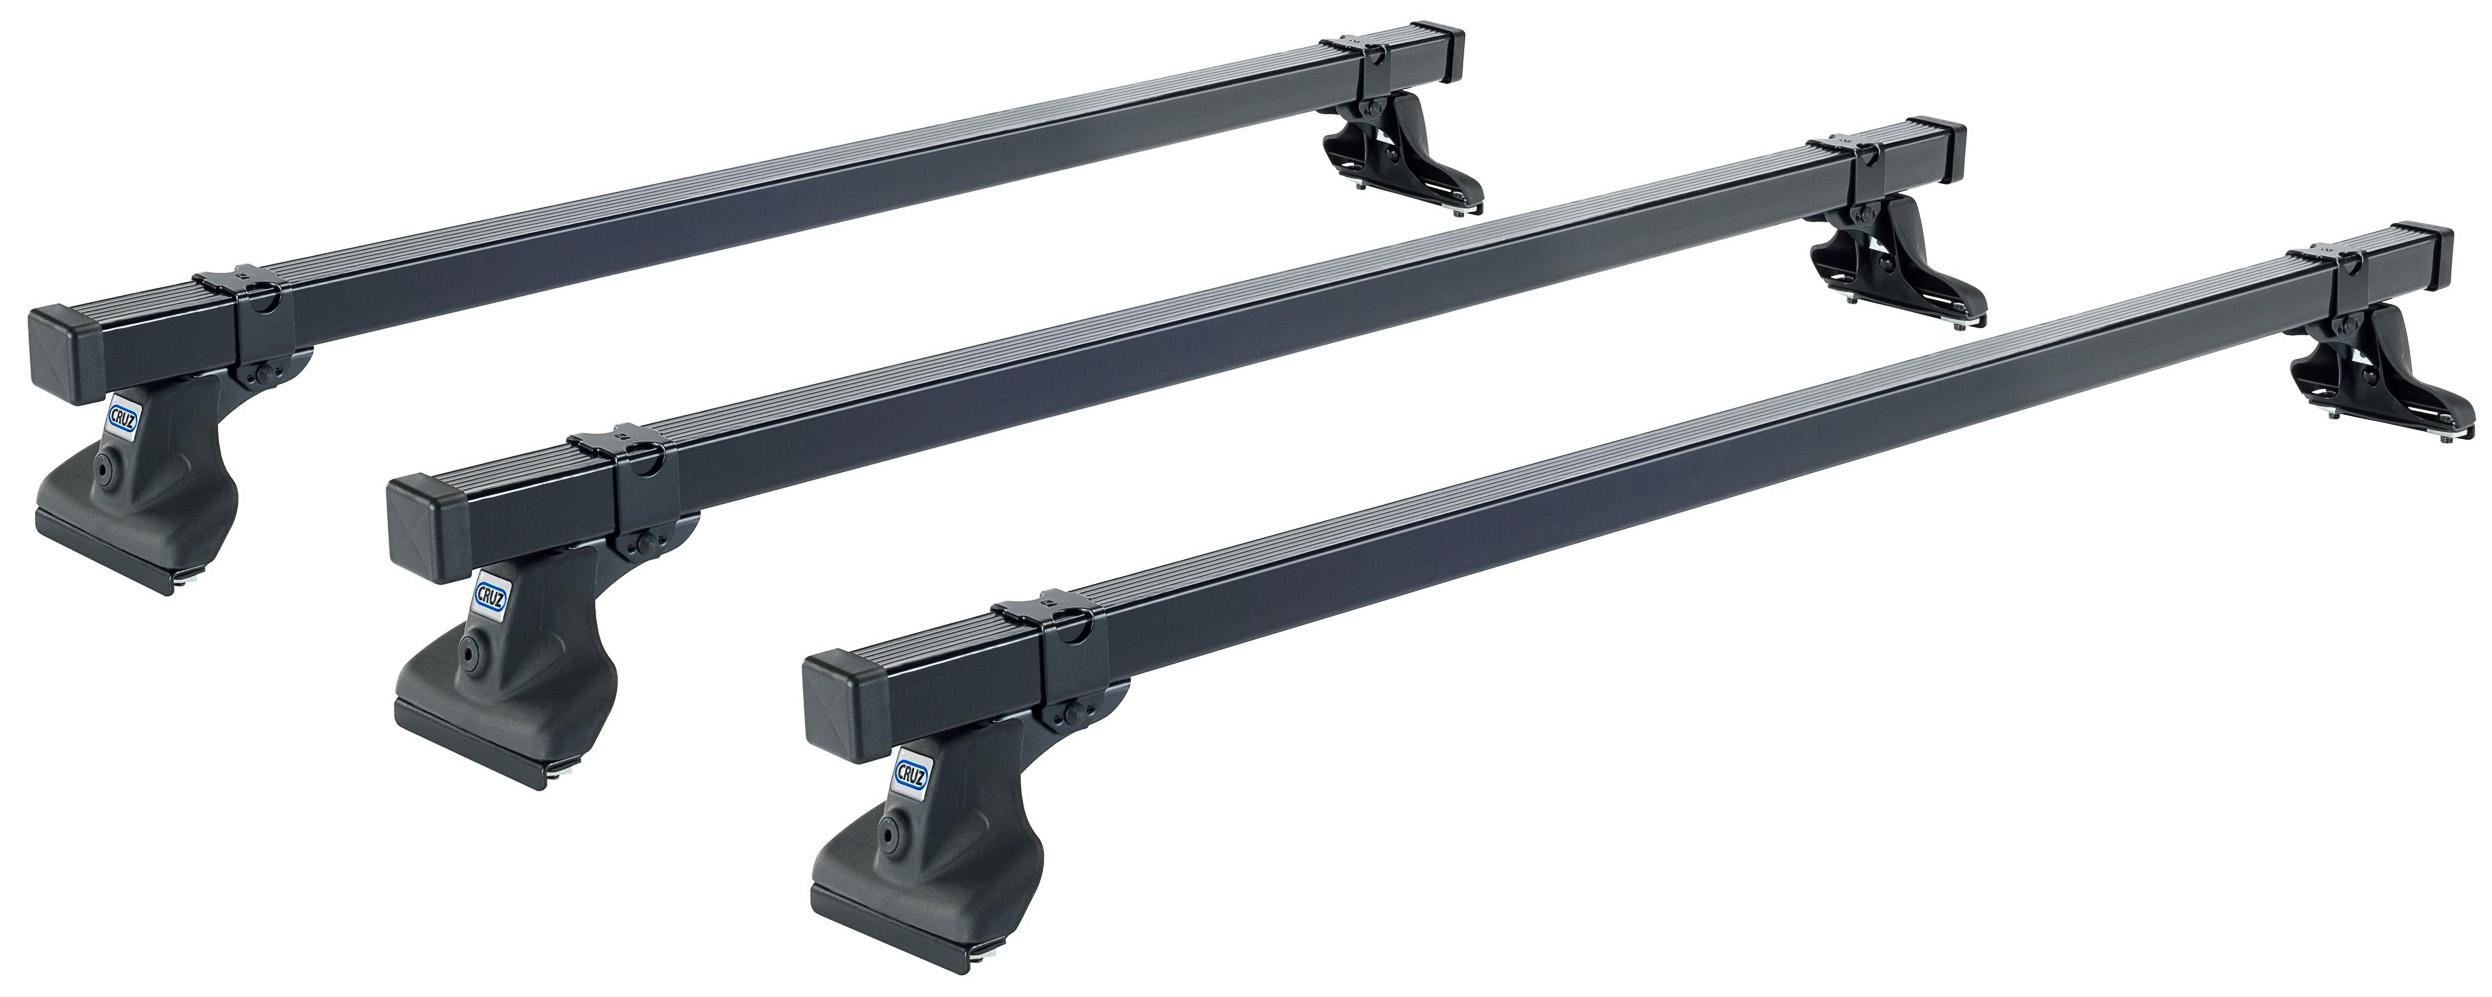 Cruz Commercial Roof Bars 35 X 35 923-400 - Pack Of 2